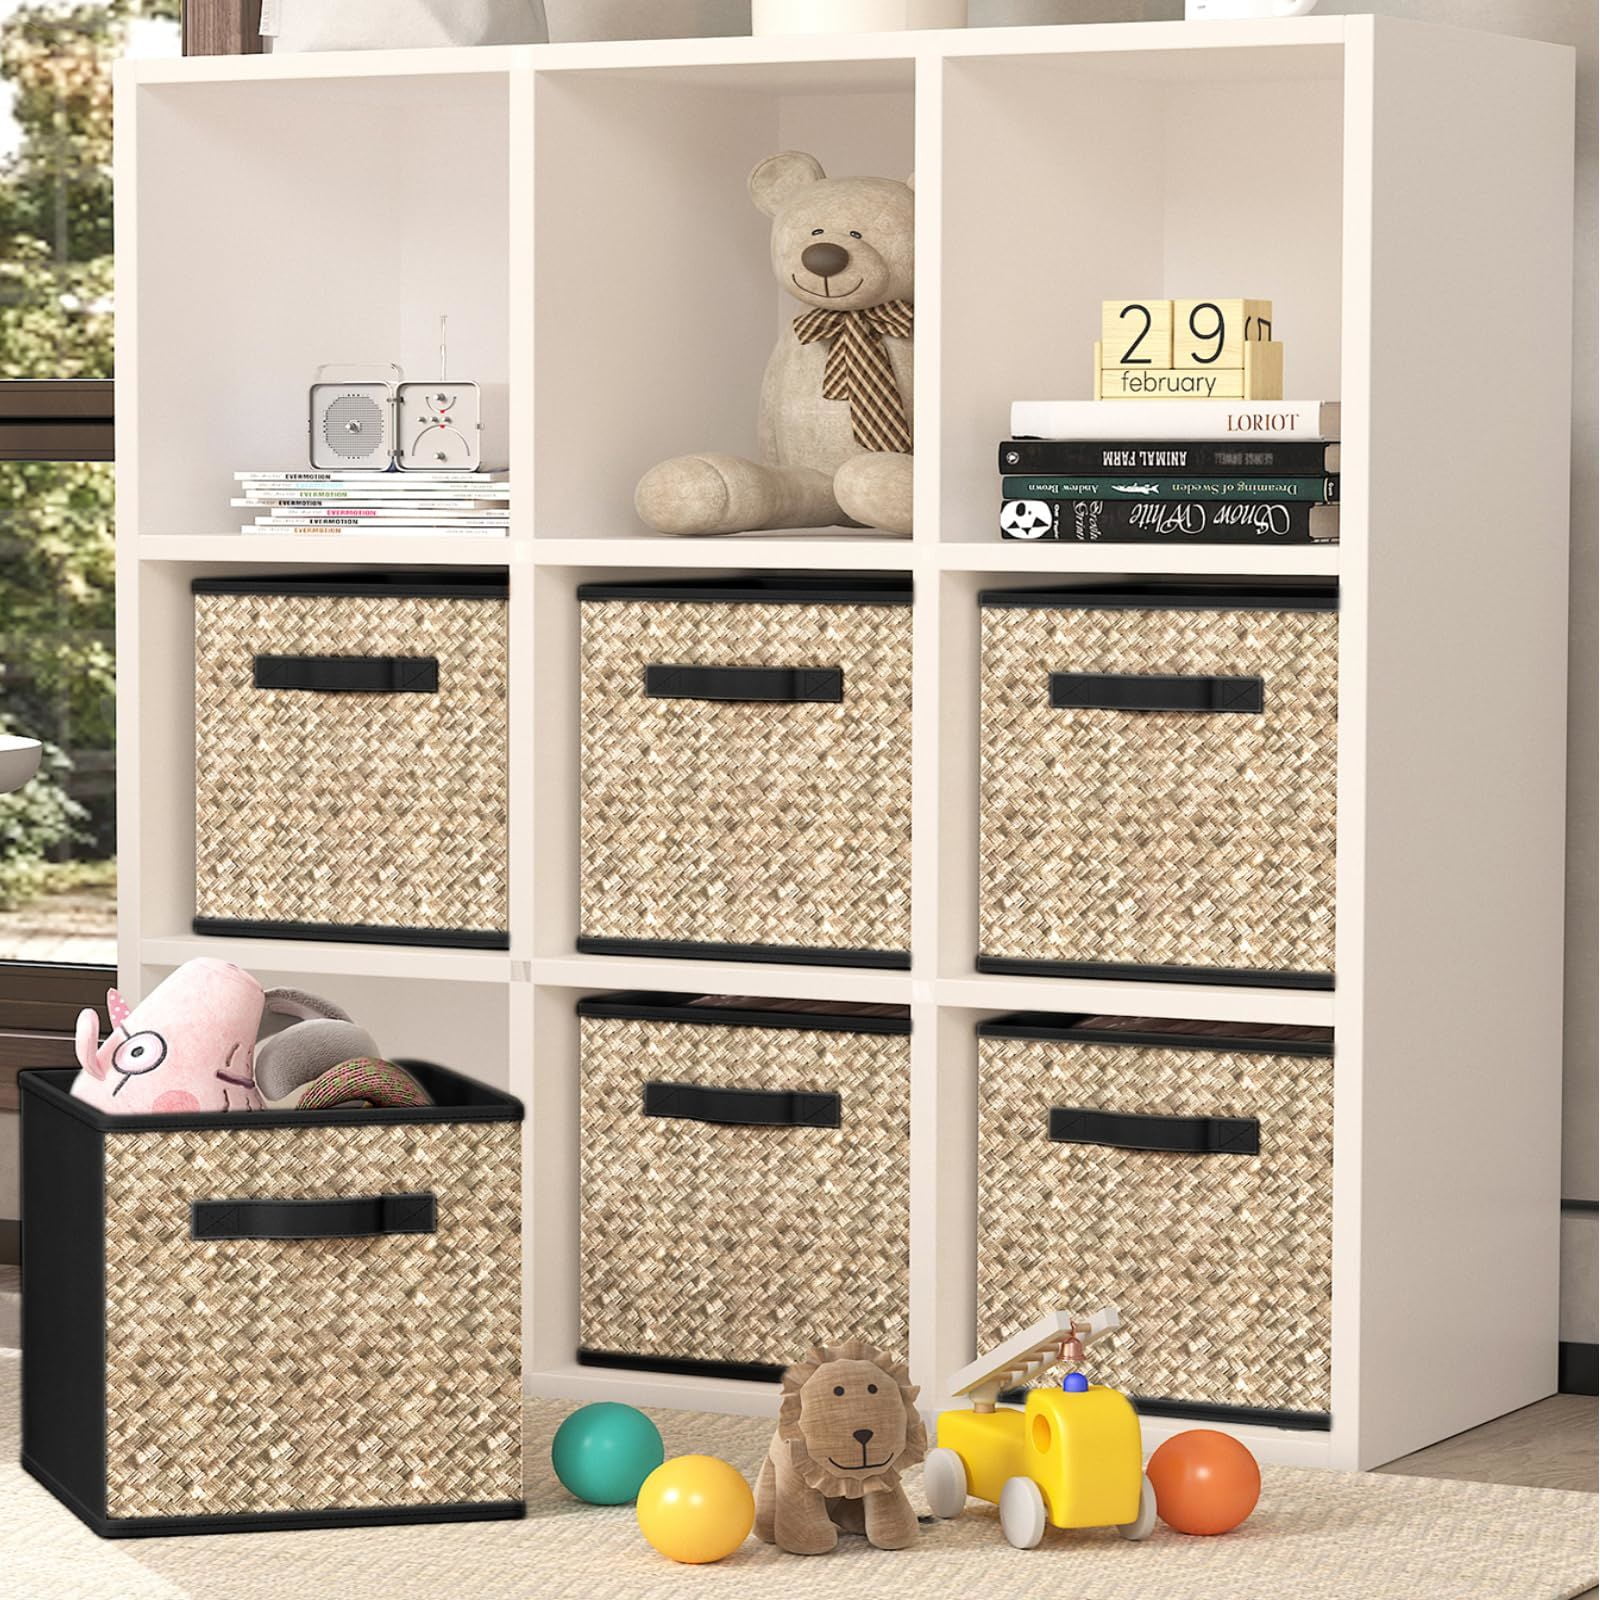 6 Pack Fabric Storage Cubes with Handle, Foldable 11 Inch Cube Storage ...